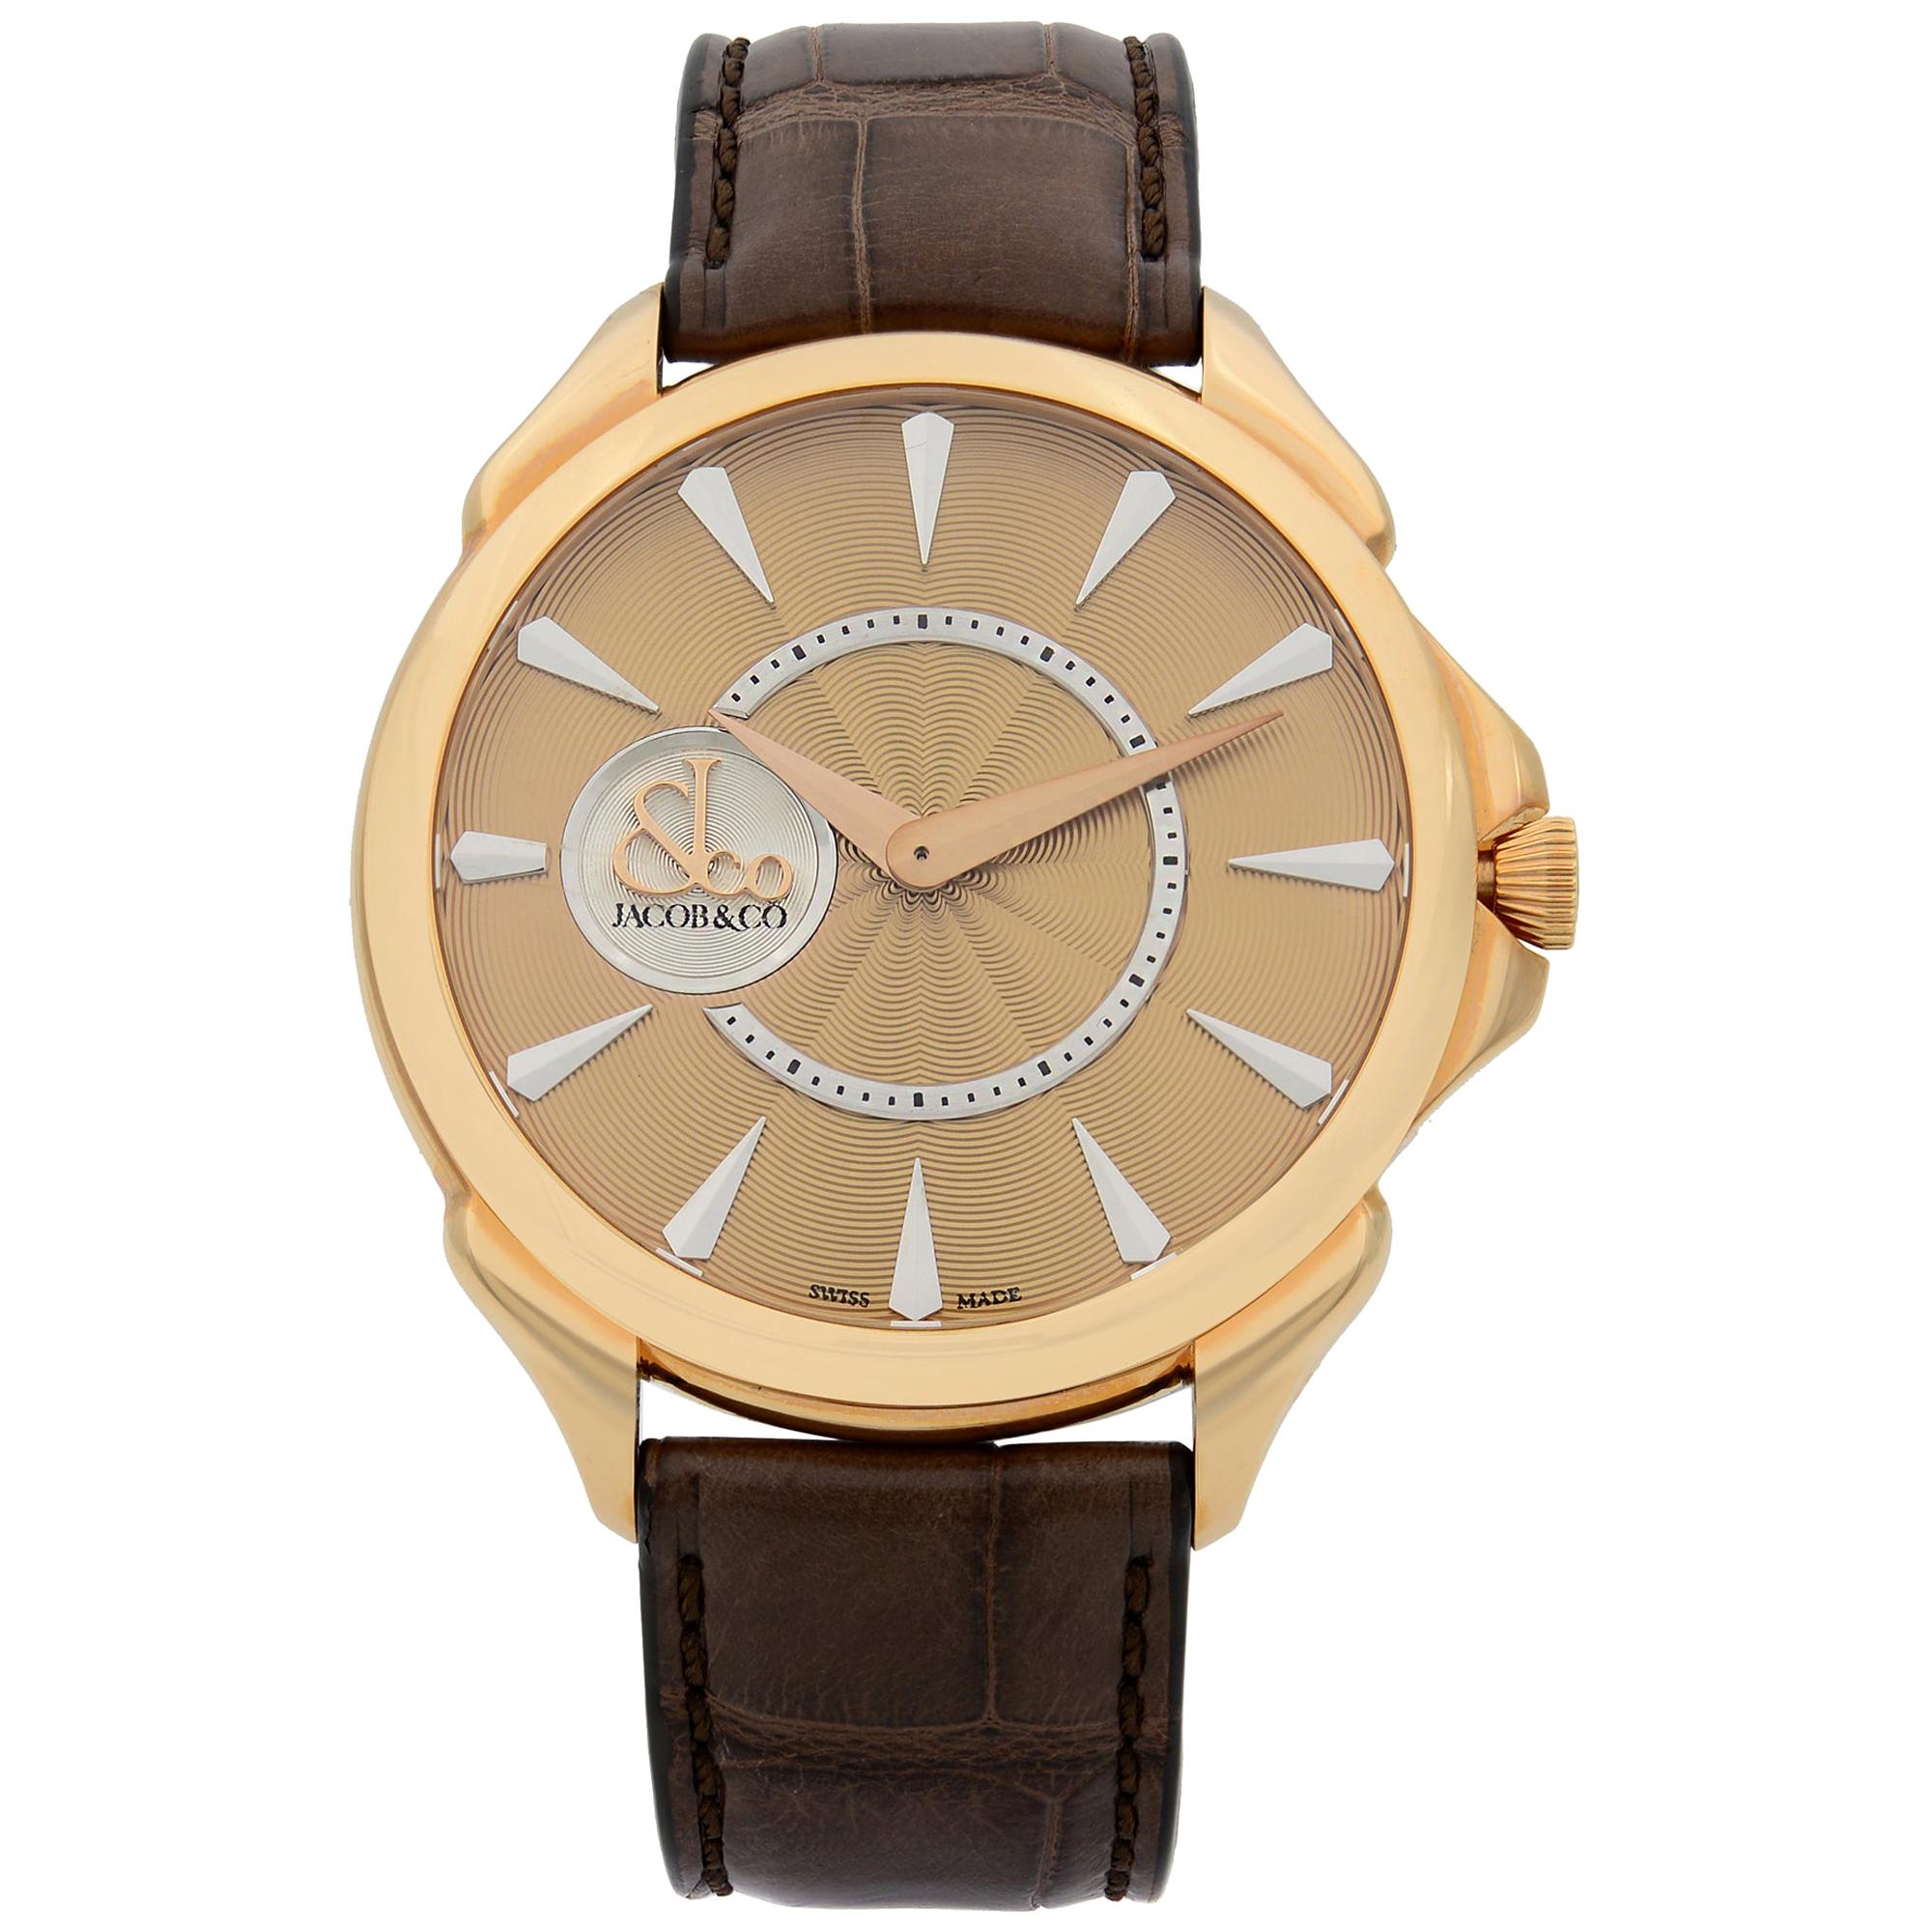 Jacob & Co. Palatial 18k Rose Gold Automatic Men's Watch 110.300.40.NS.NB.1NS For Sale